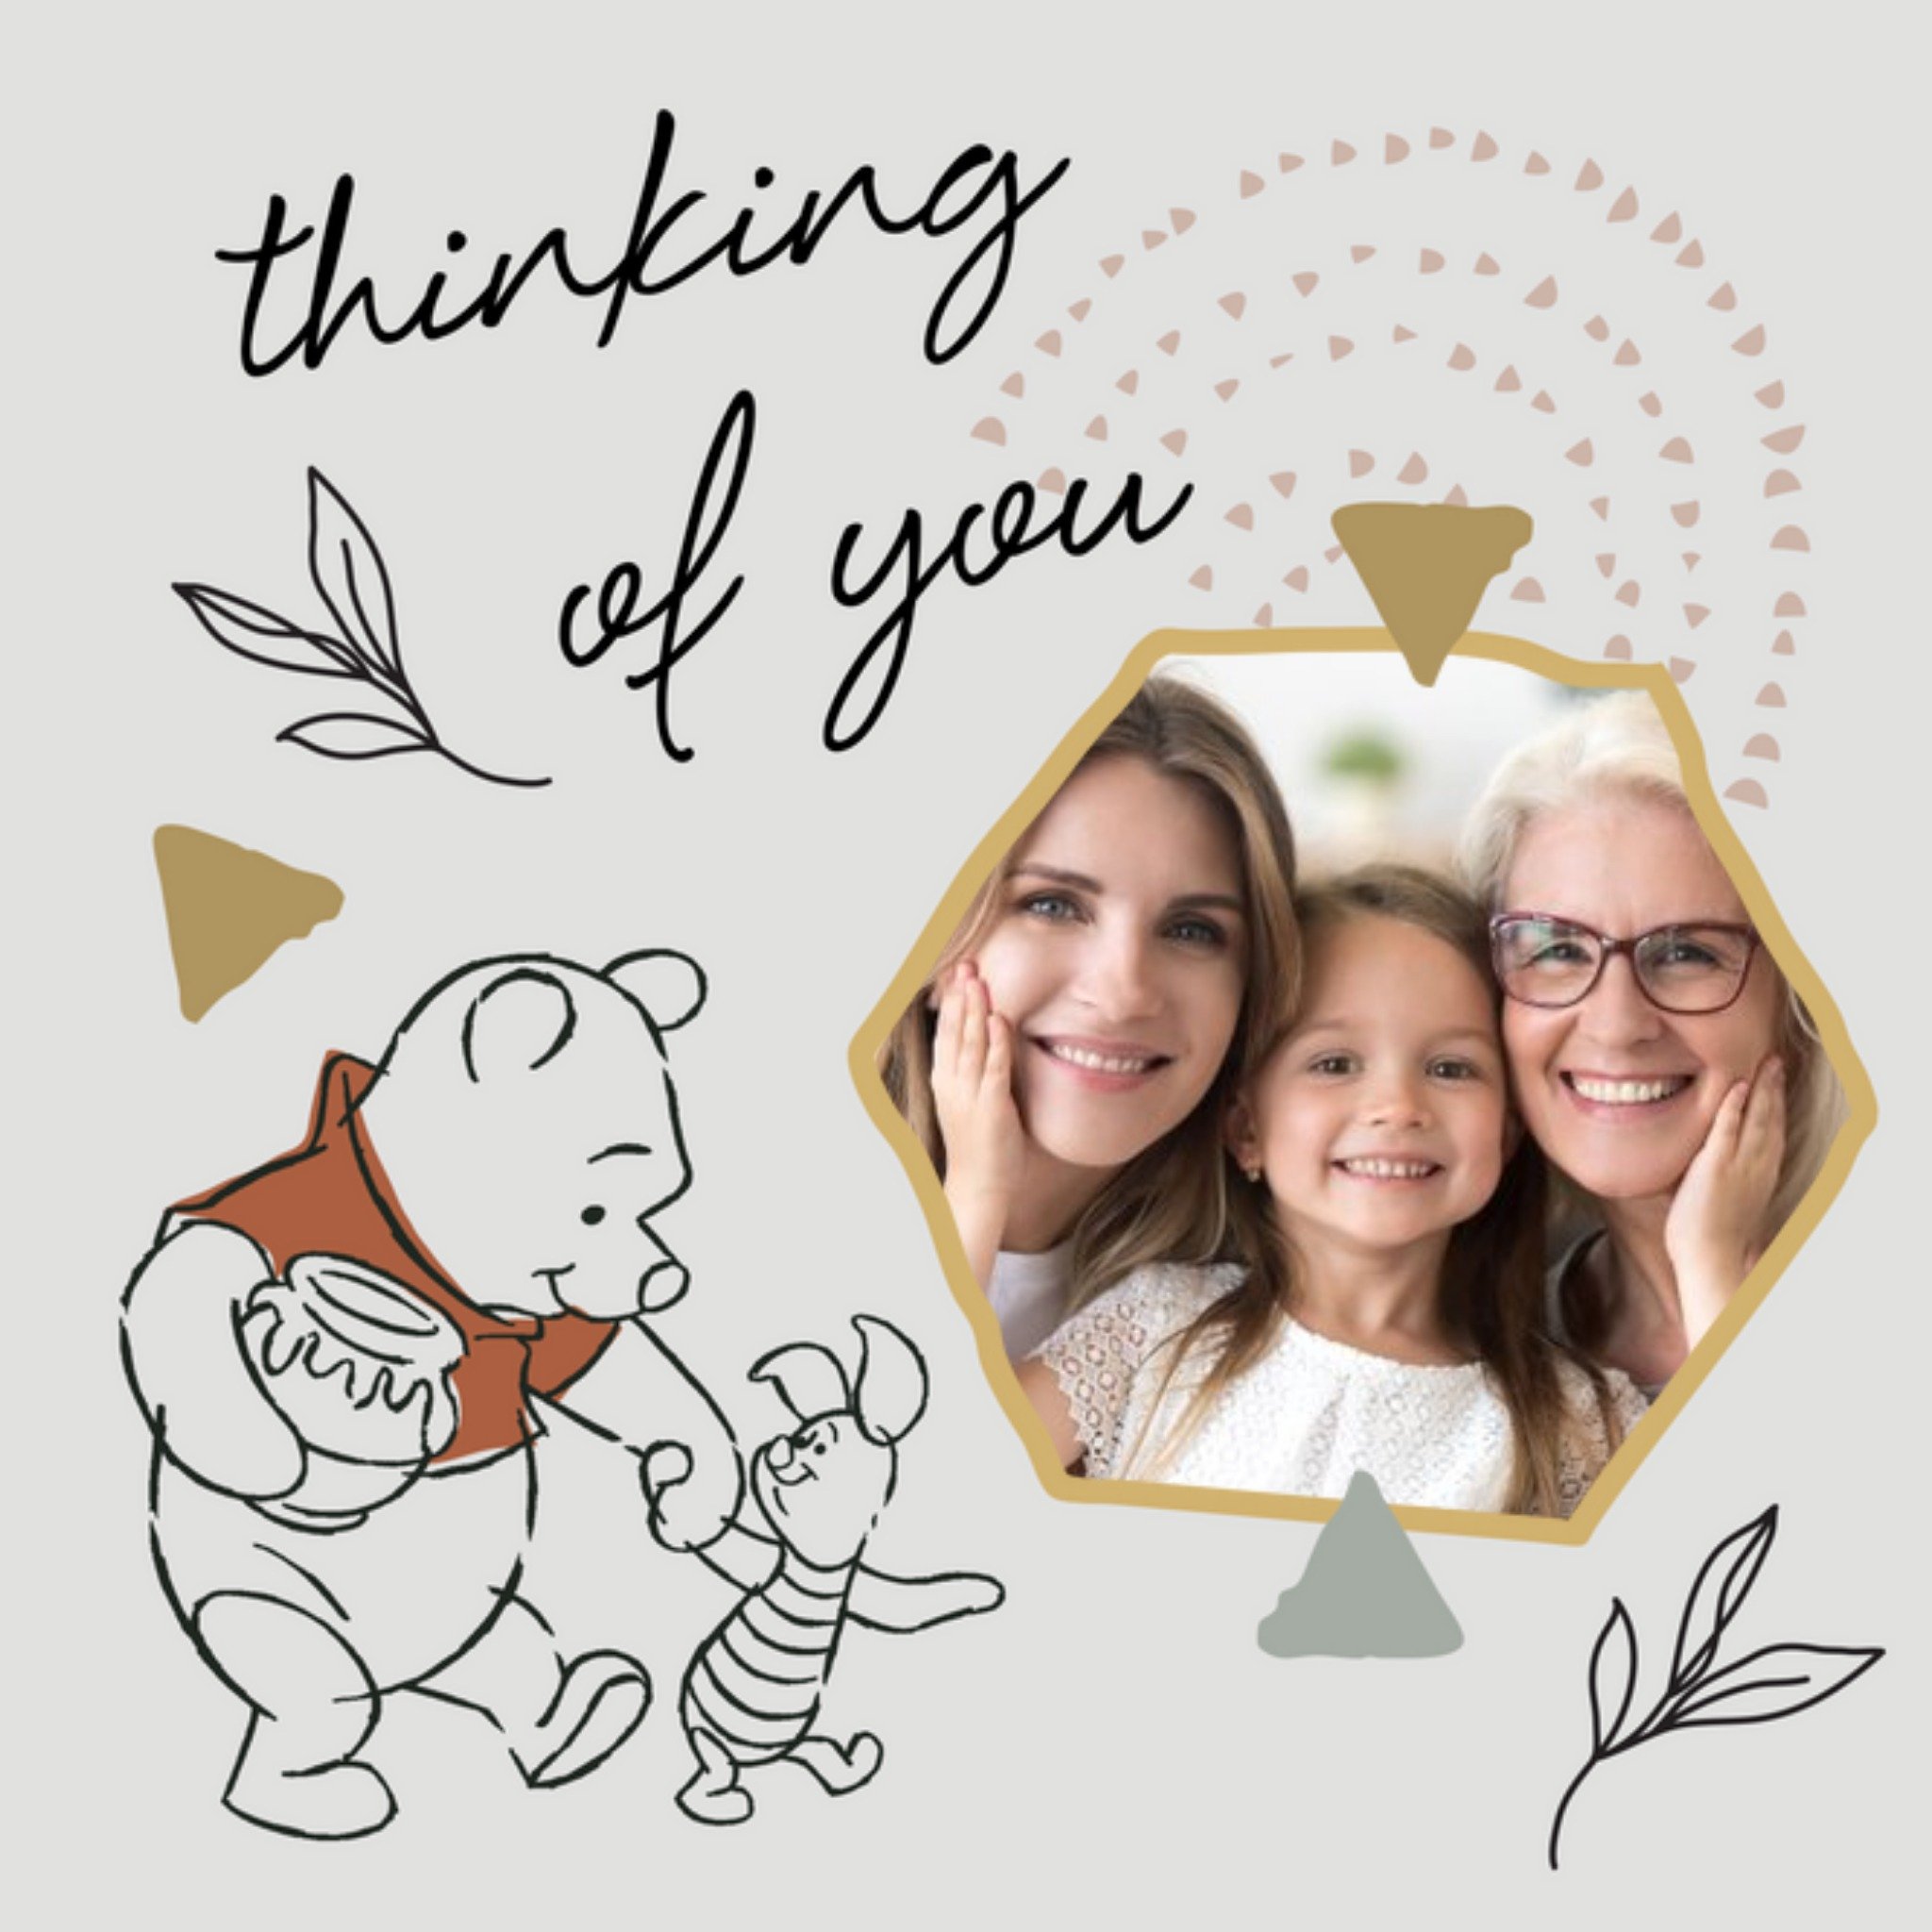 Disney Winnie The Pooh And Piglet Illustration Thinking Of You Photo Upload Card, Square